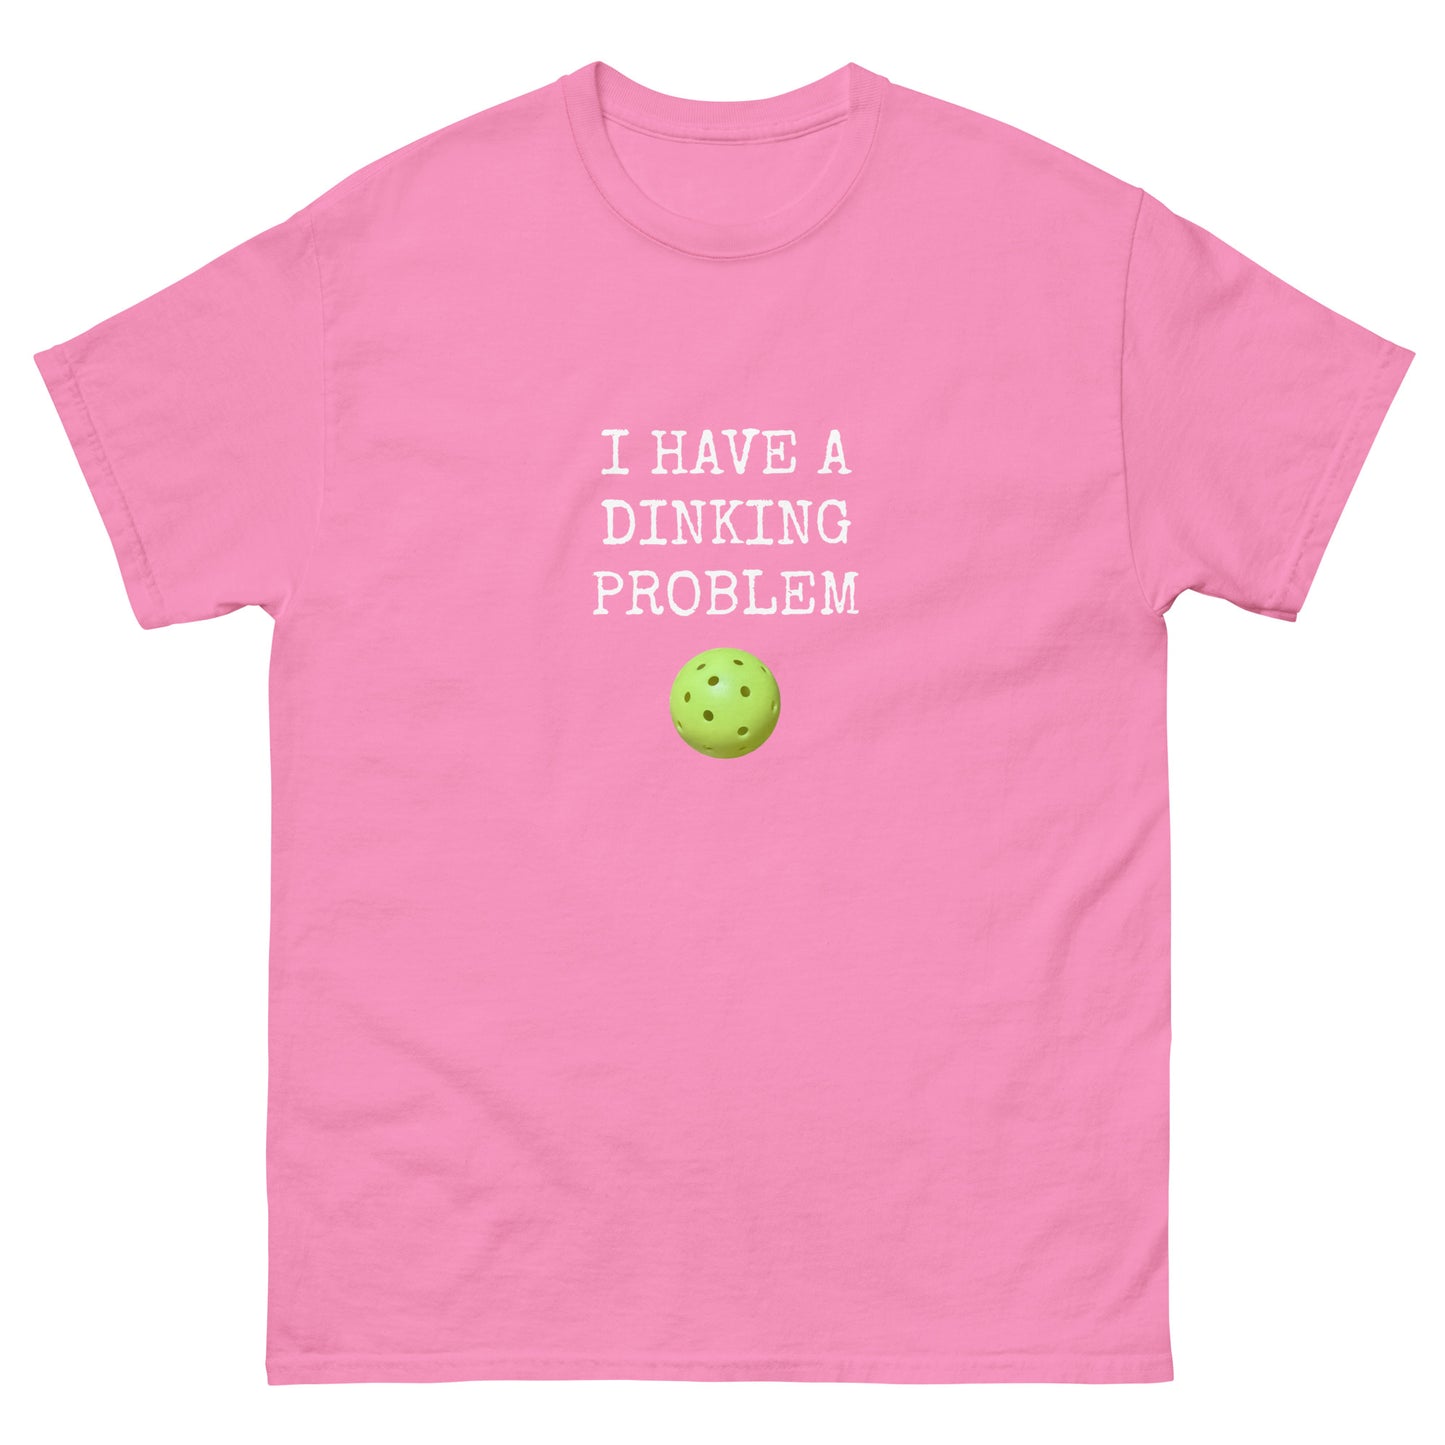 Dinking Problem classic tee